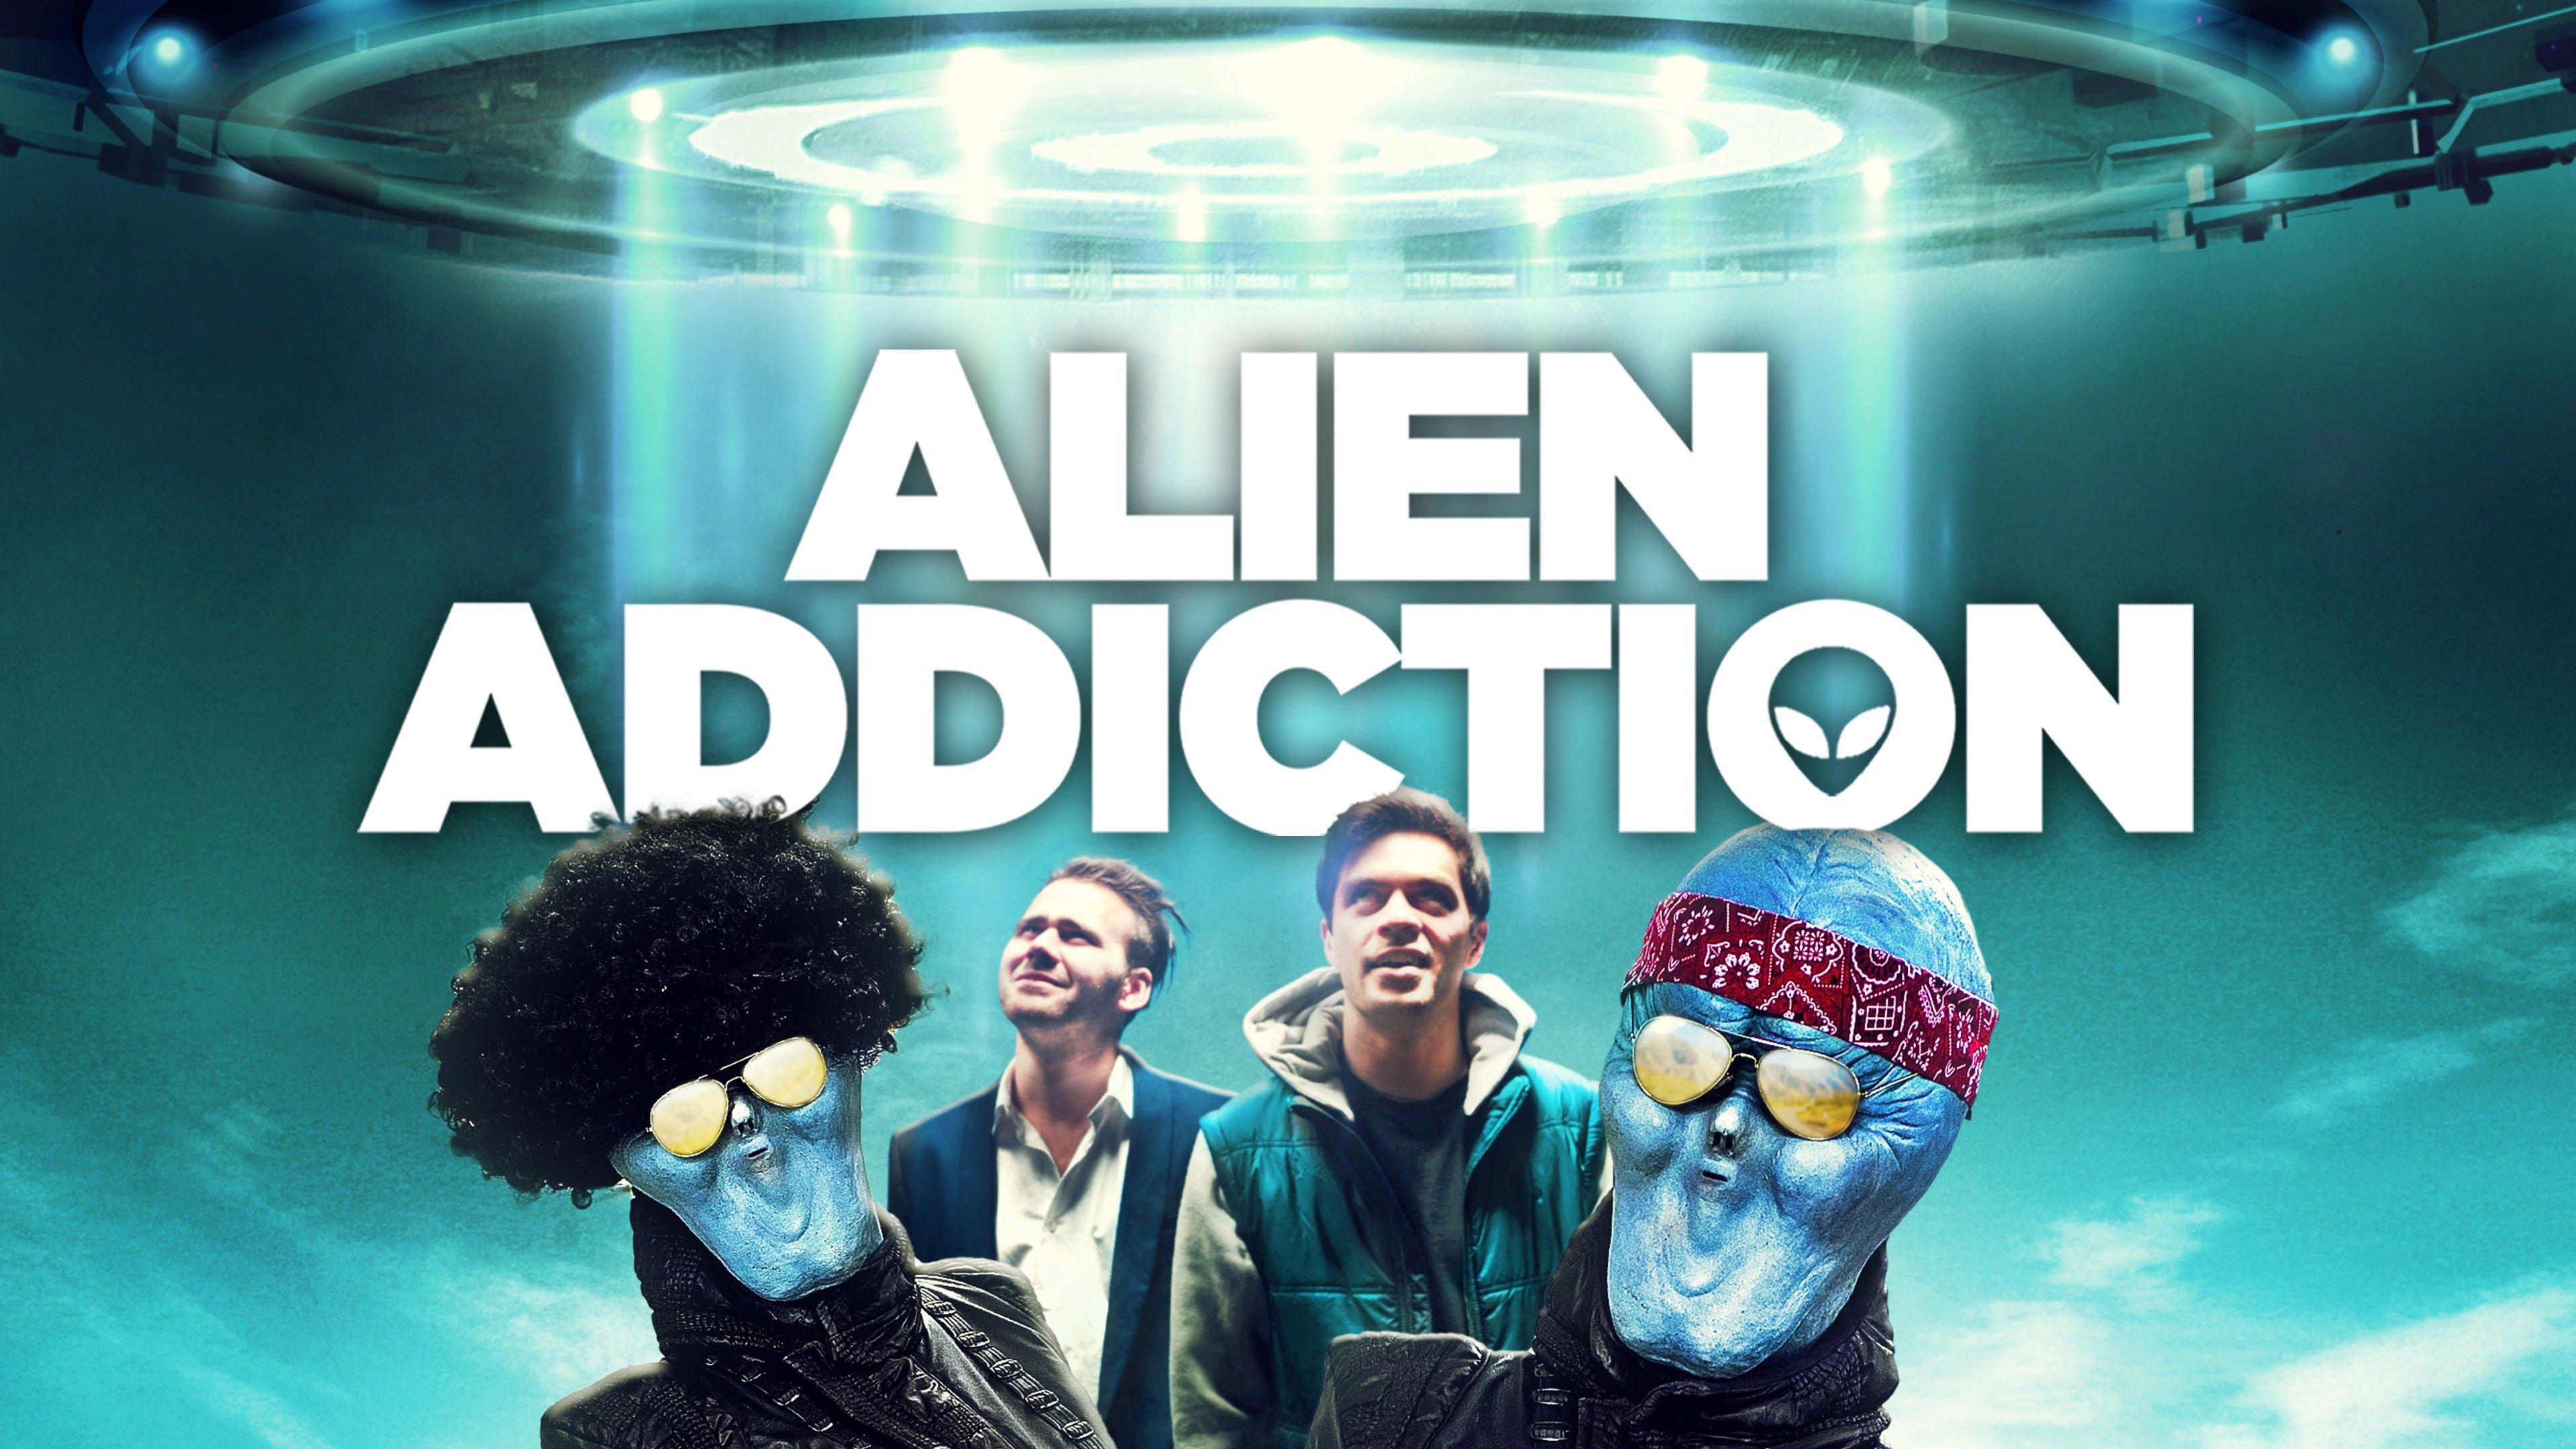 Watch Alien Addiction Streaming Online On Philo Free Trial